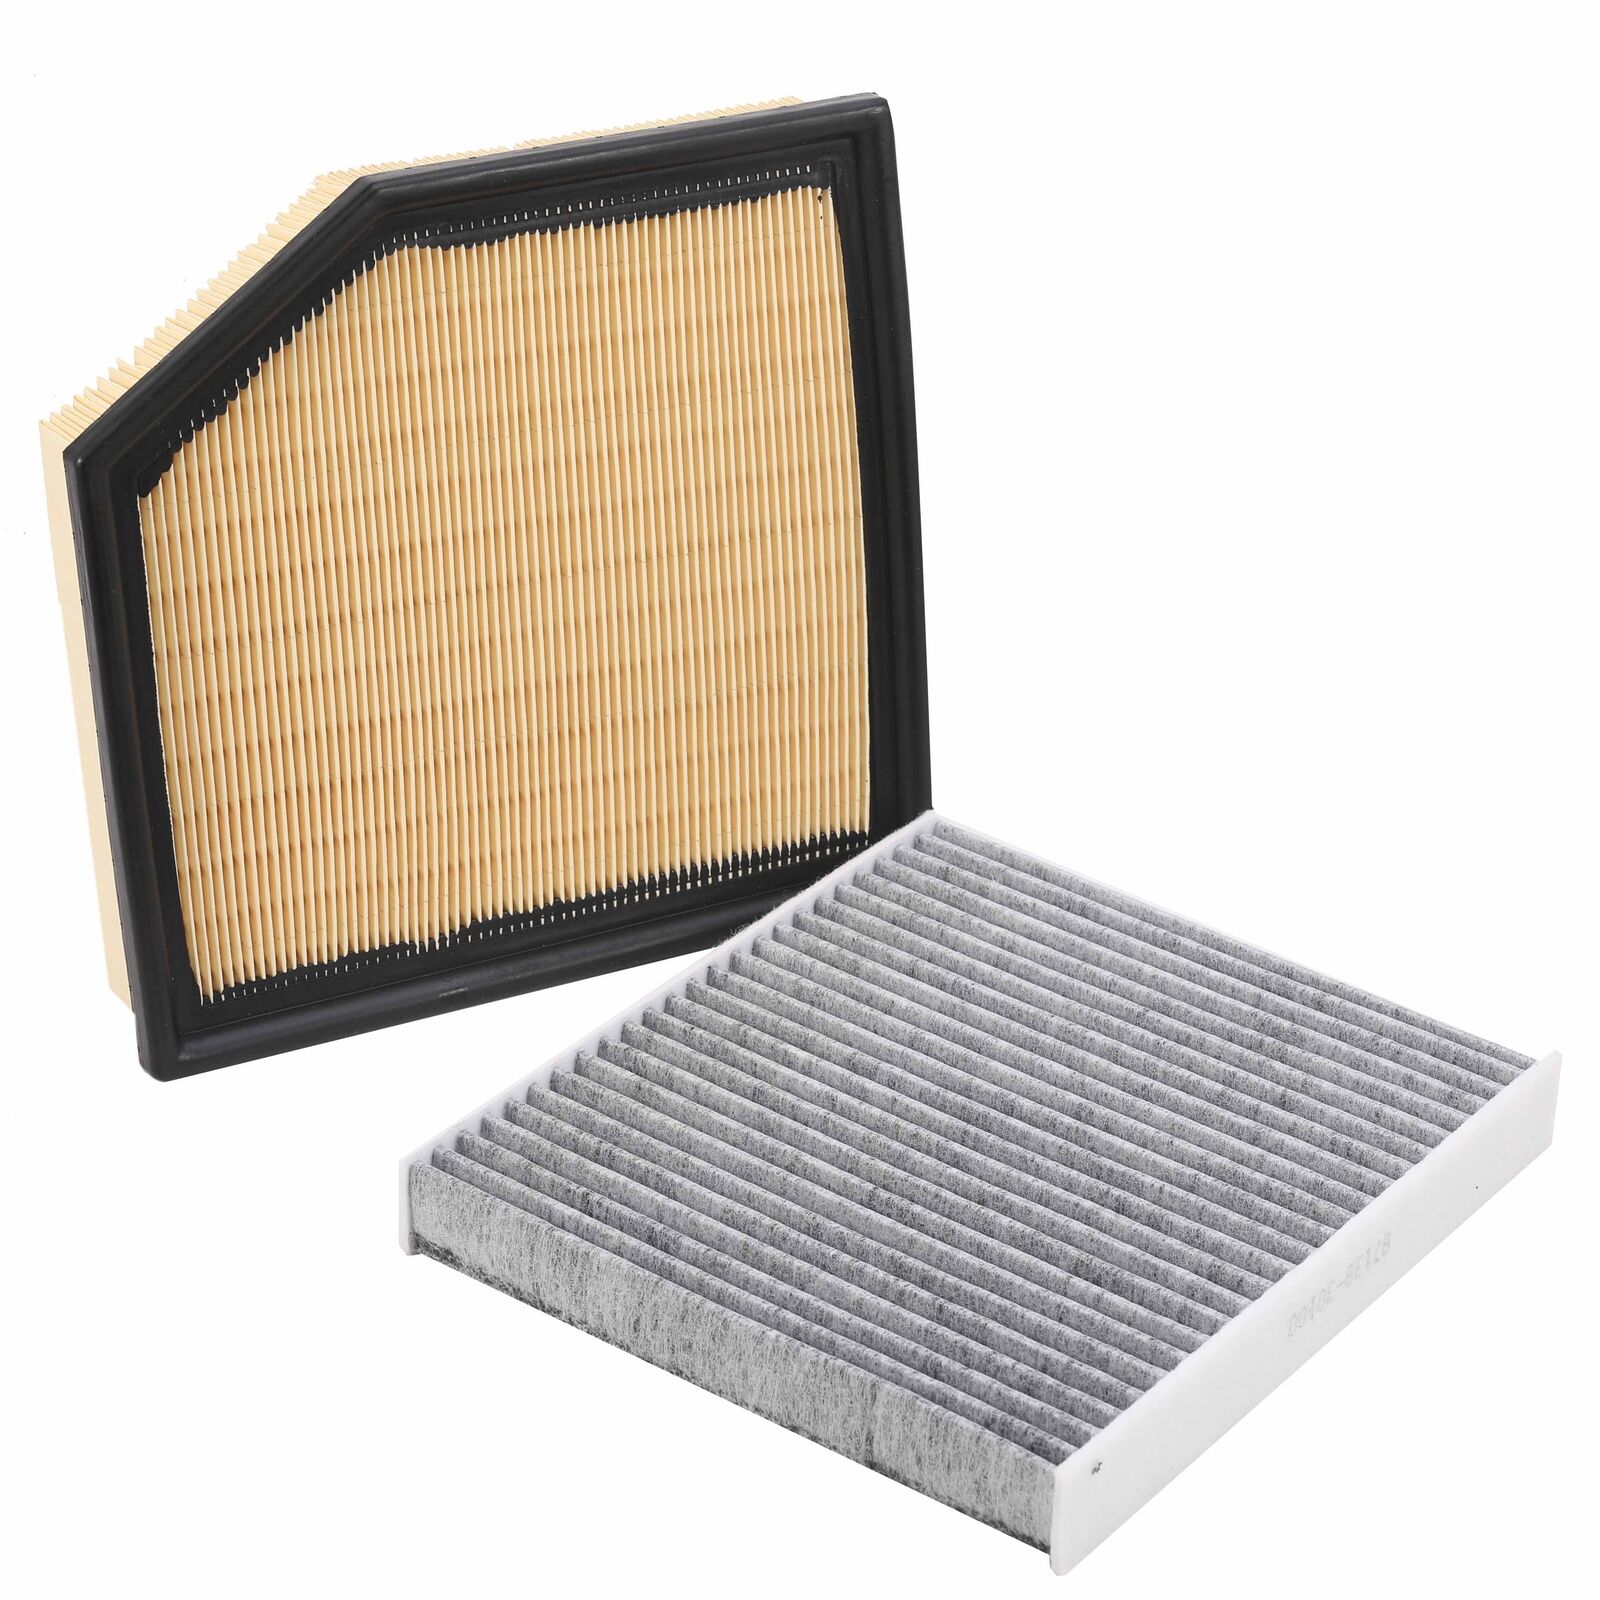 Engine & Cabin Air Filter For GS350 GS450h GS200t IS300 IS200t IS250 IS350 RC350